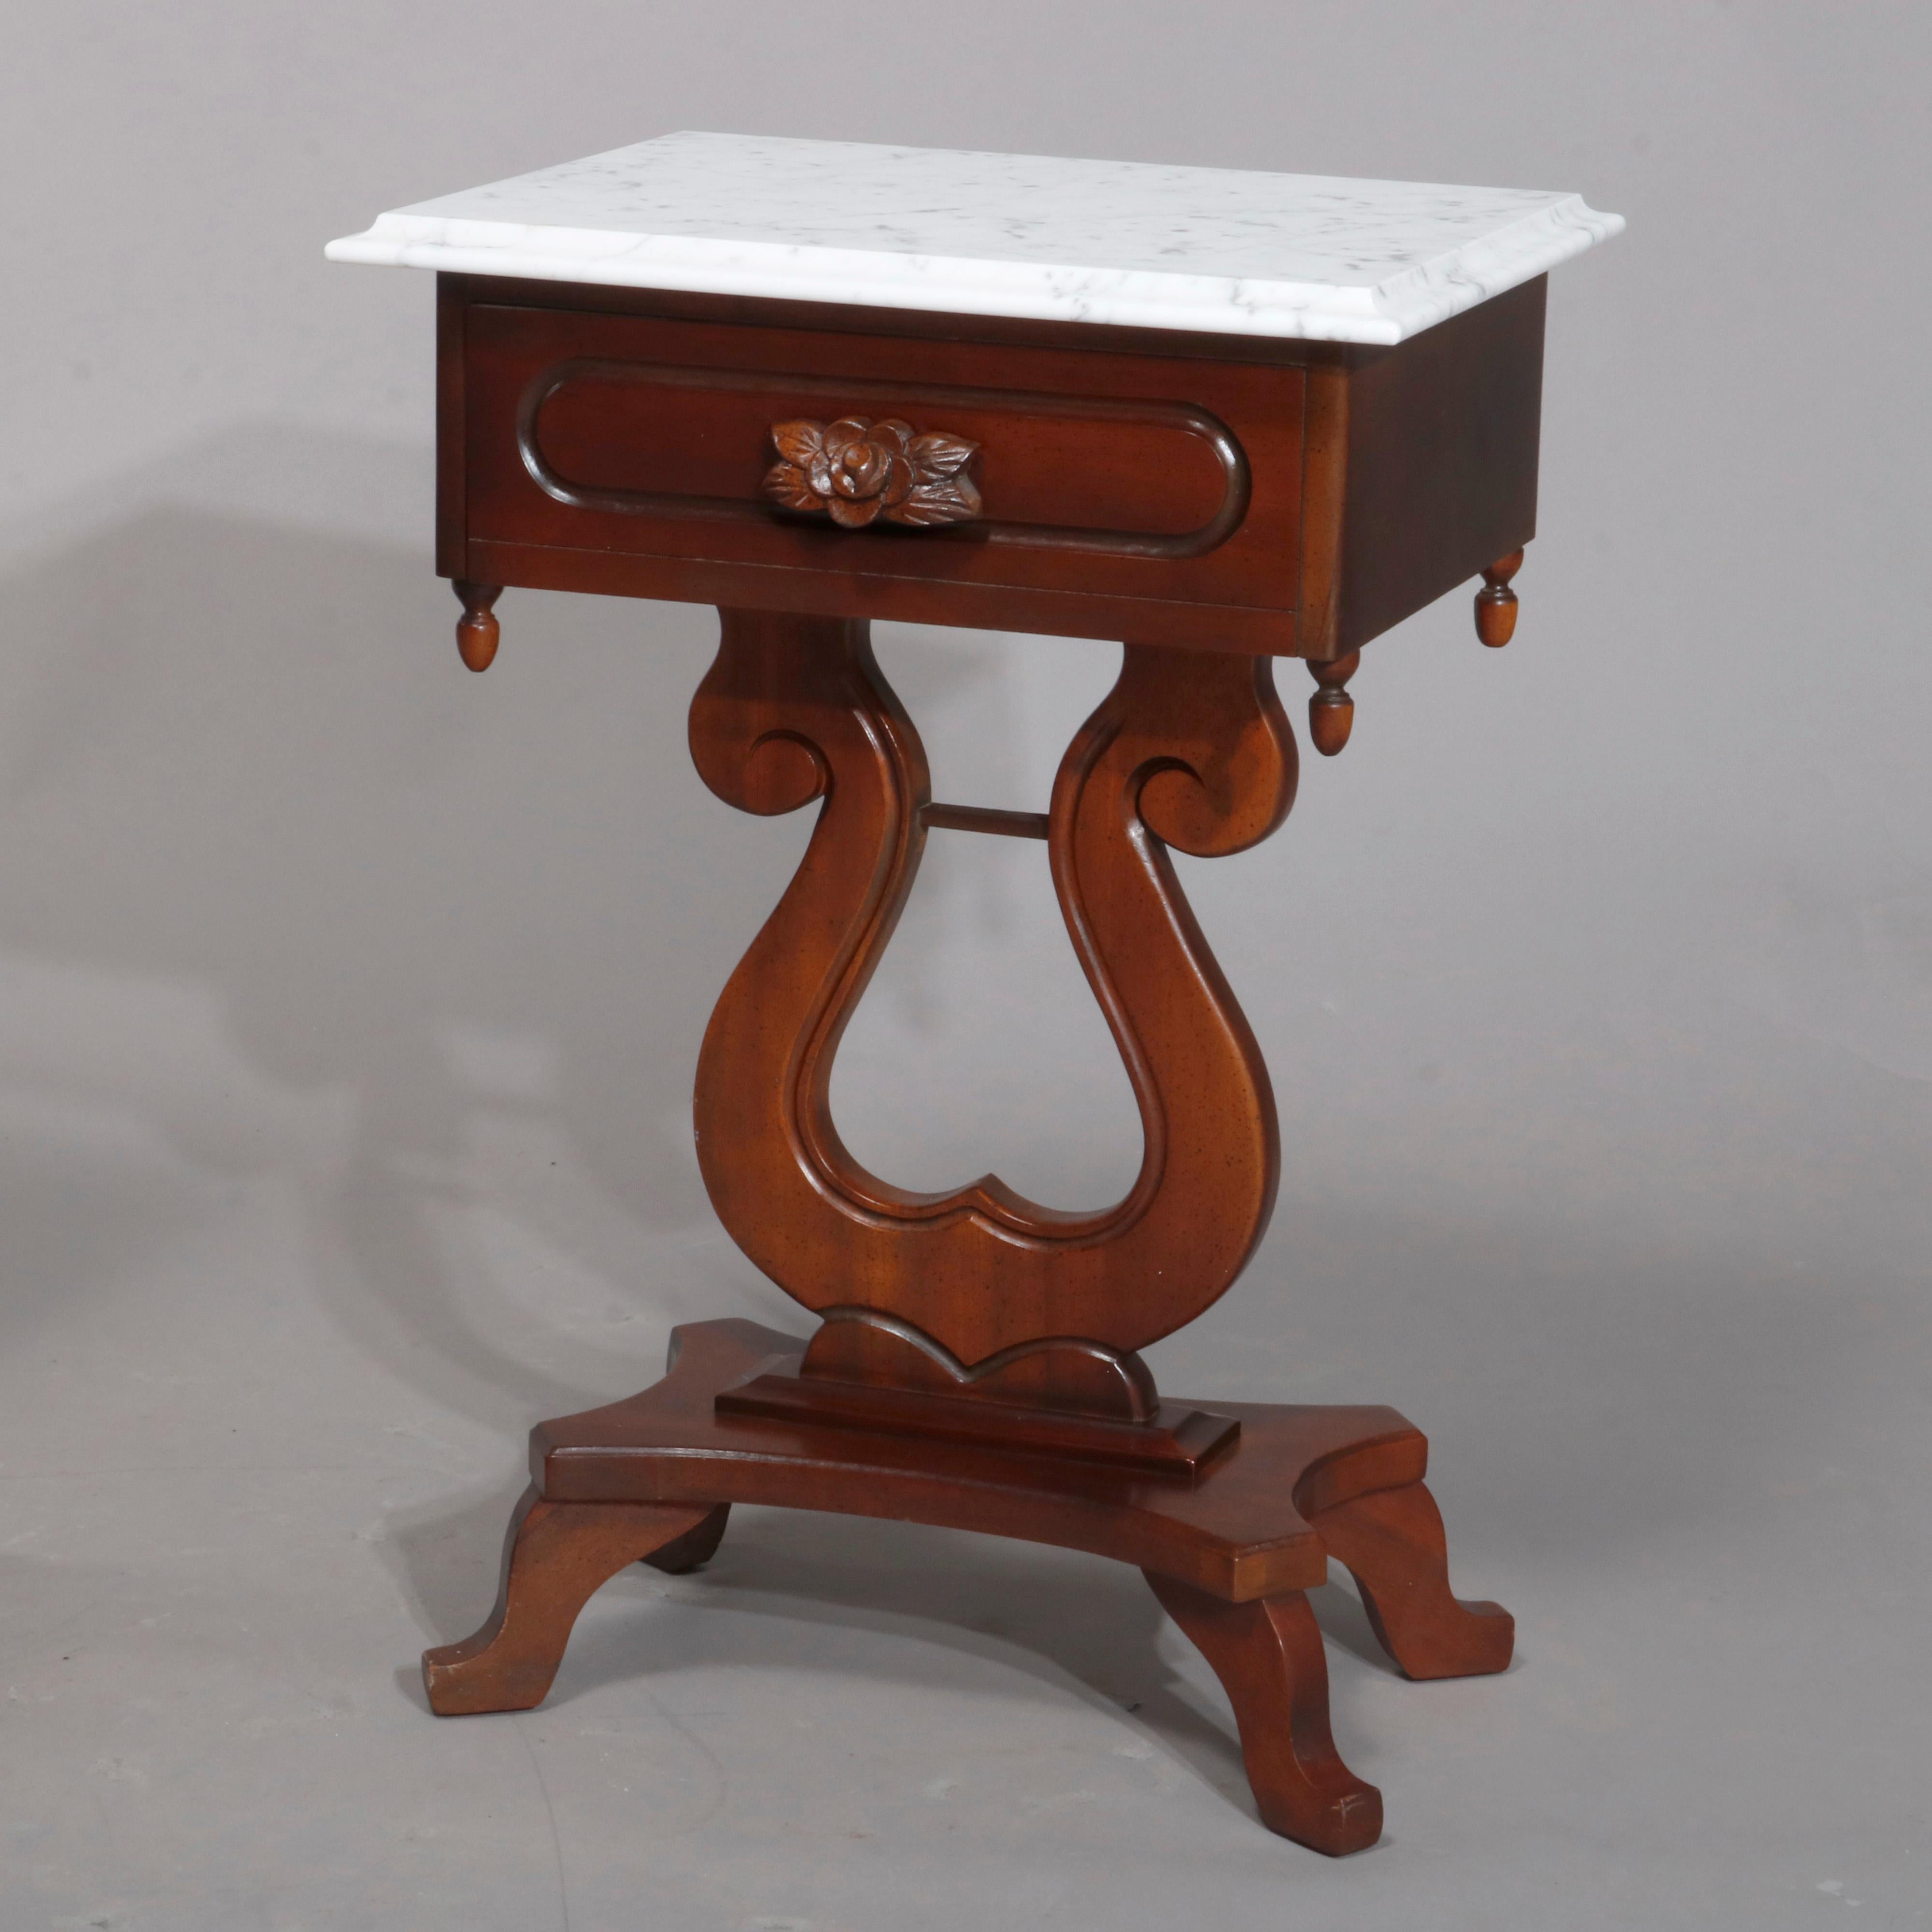 A pair of vintage Sheraton Duncan Phyfe style side stands offer beveled marble tops over mahogany cases with single drawer having carved pull and drop finials surmounting lyre form pedestals seated on base with four feet, 20th century

Measures: